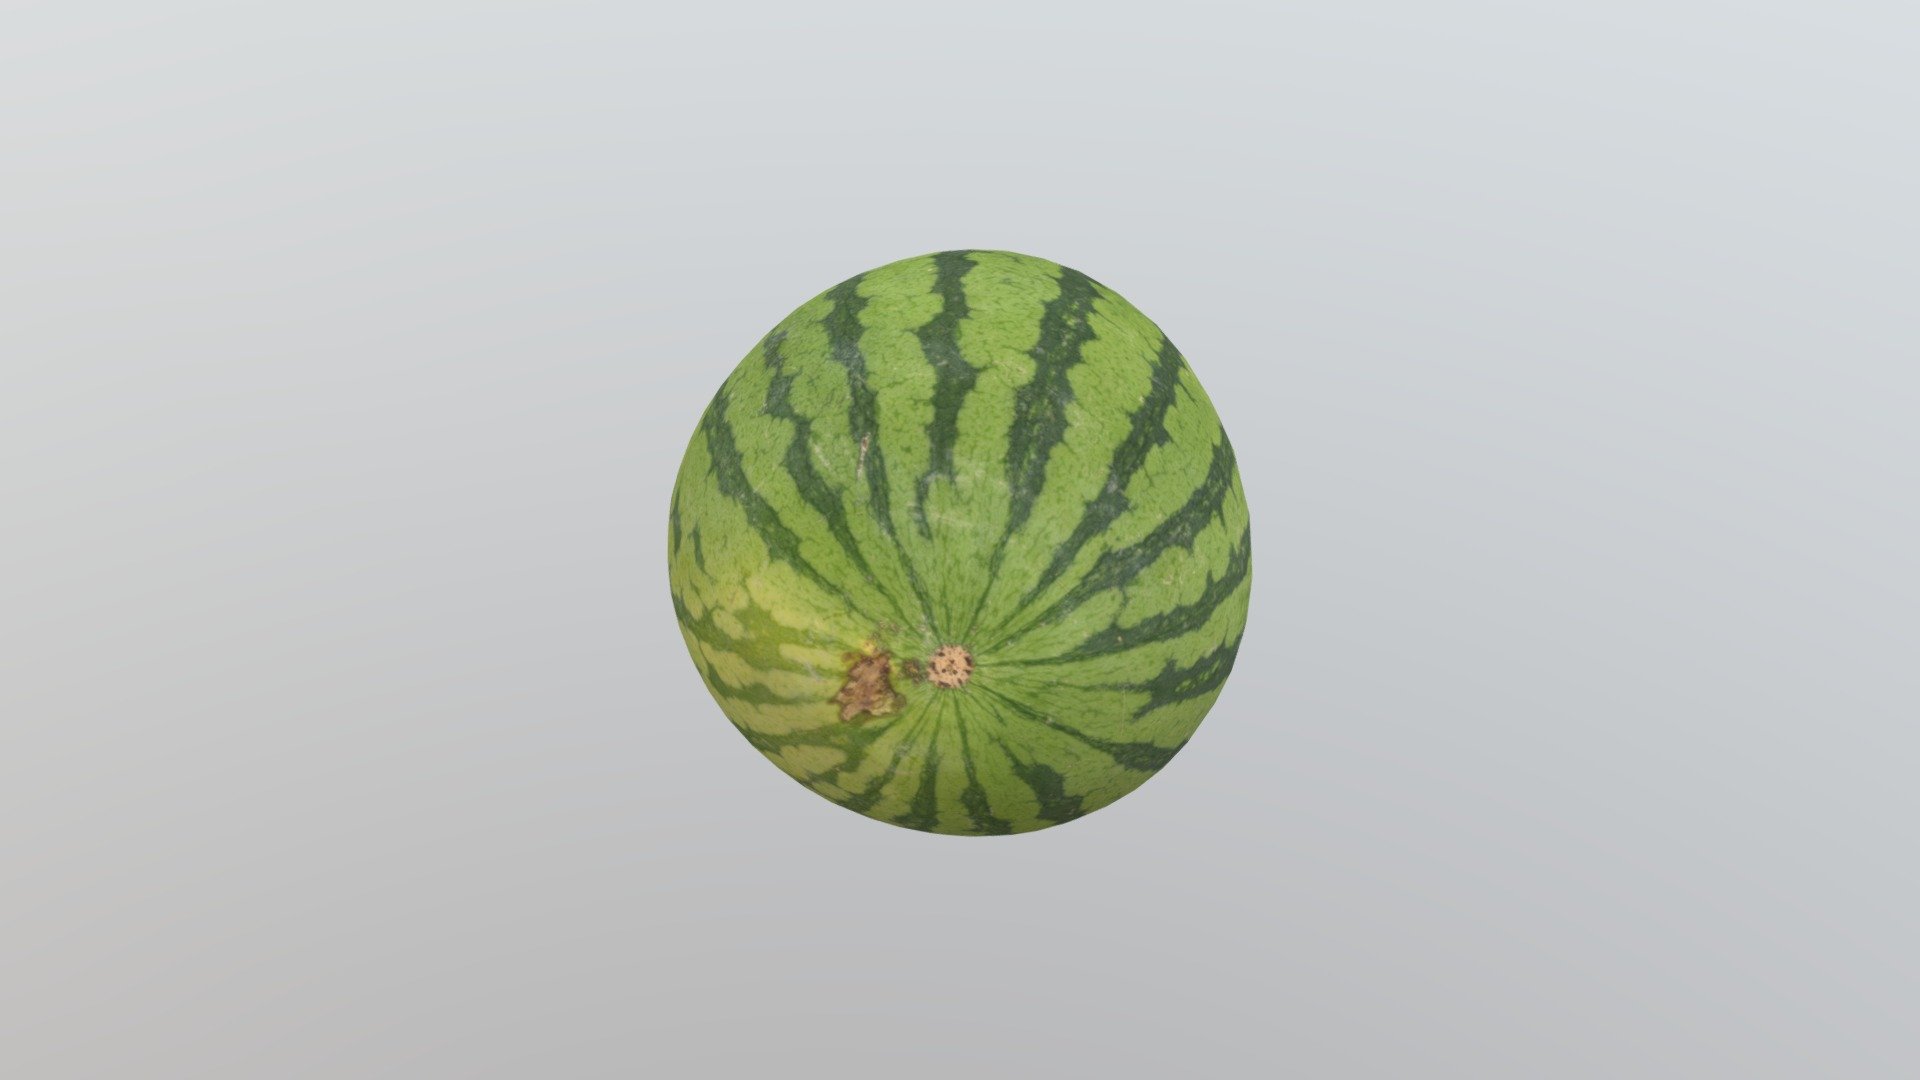 About the product:-

Watermelon 3D Model AR VR PBR Low-poly 3D model with game ready.

Model placed in 0,0,0 axes.

Game ready, Real time apps, Virtual Reality VR, Metaverse,  Augmented Reality AR. Decent poly count

Single mesh Poly Counts:

Verts : 946 Edge : 1888 Polygons : 944 Tris : 1888 Uv's : 998

Renders:-

Do the renders in Marmoset with studio HDRI.

Technical info:-

Model is real-world scale. UVs non overlapped, Units used: centimeters.

Texturing:

I am using a PBR textures.(diffuse, normal and specularMap) - Watermelon 3D Model AR VR PBR - 3D model by multicrowstudio 3d model